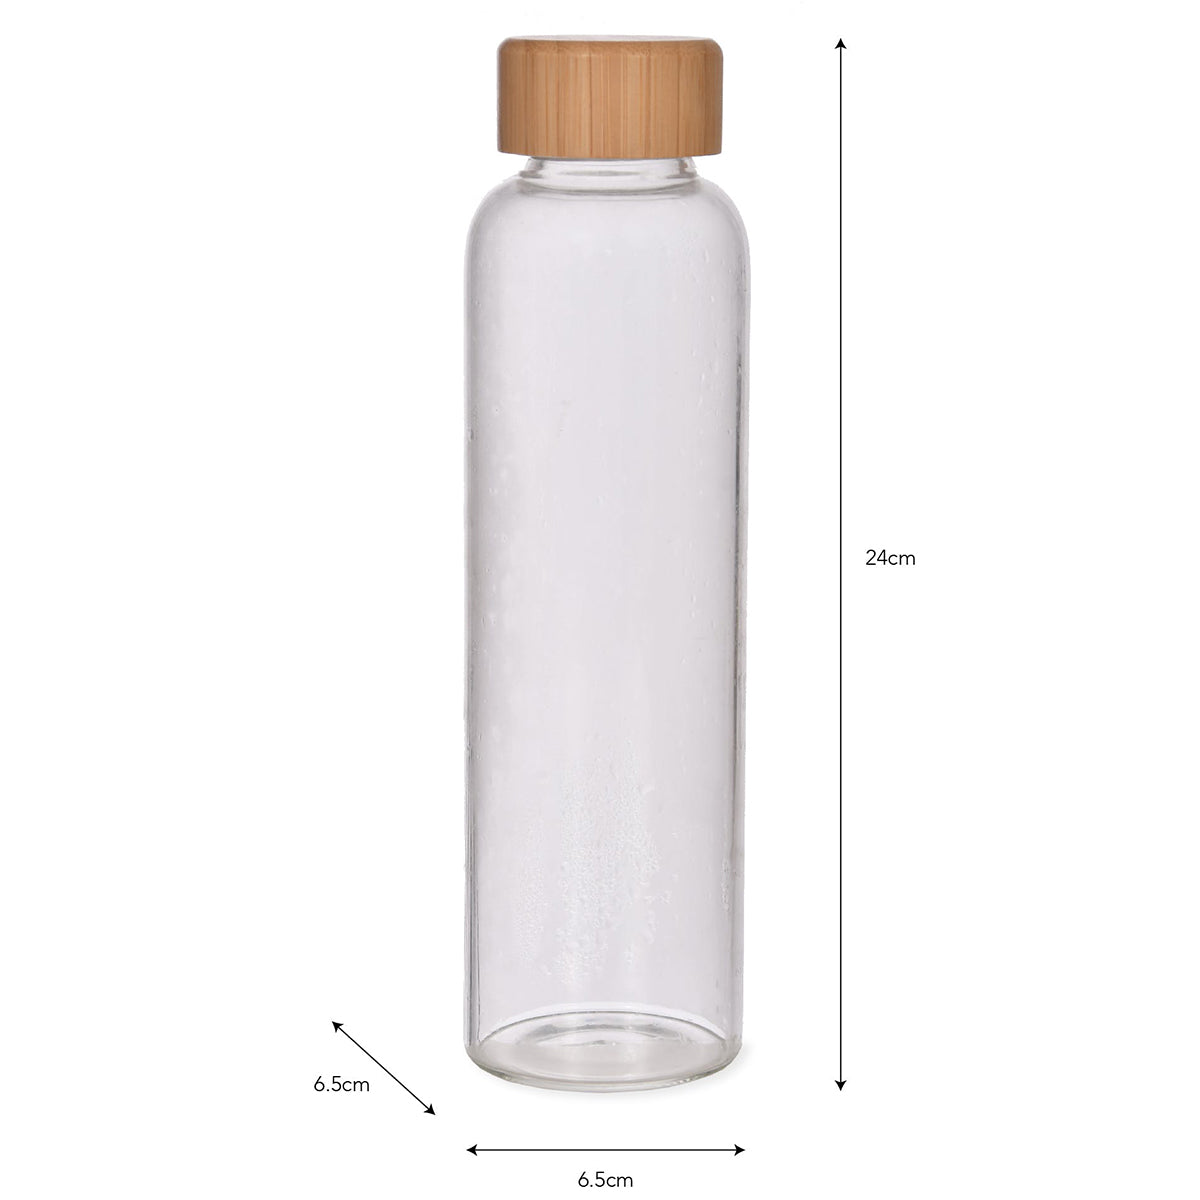 bottle with bamboo lid measurements 